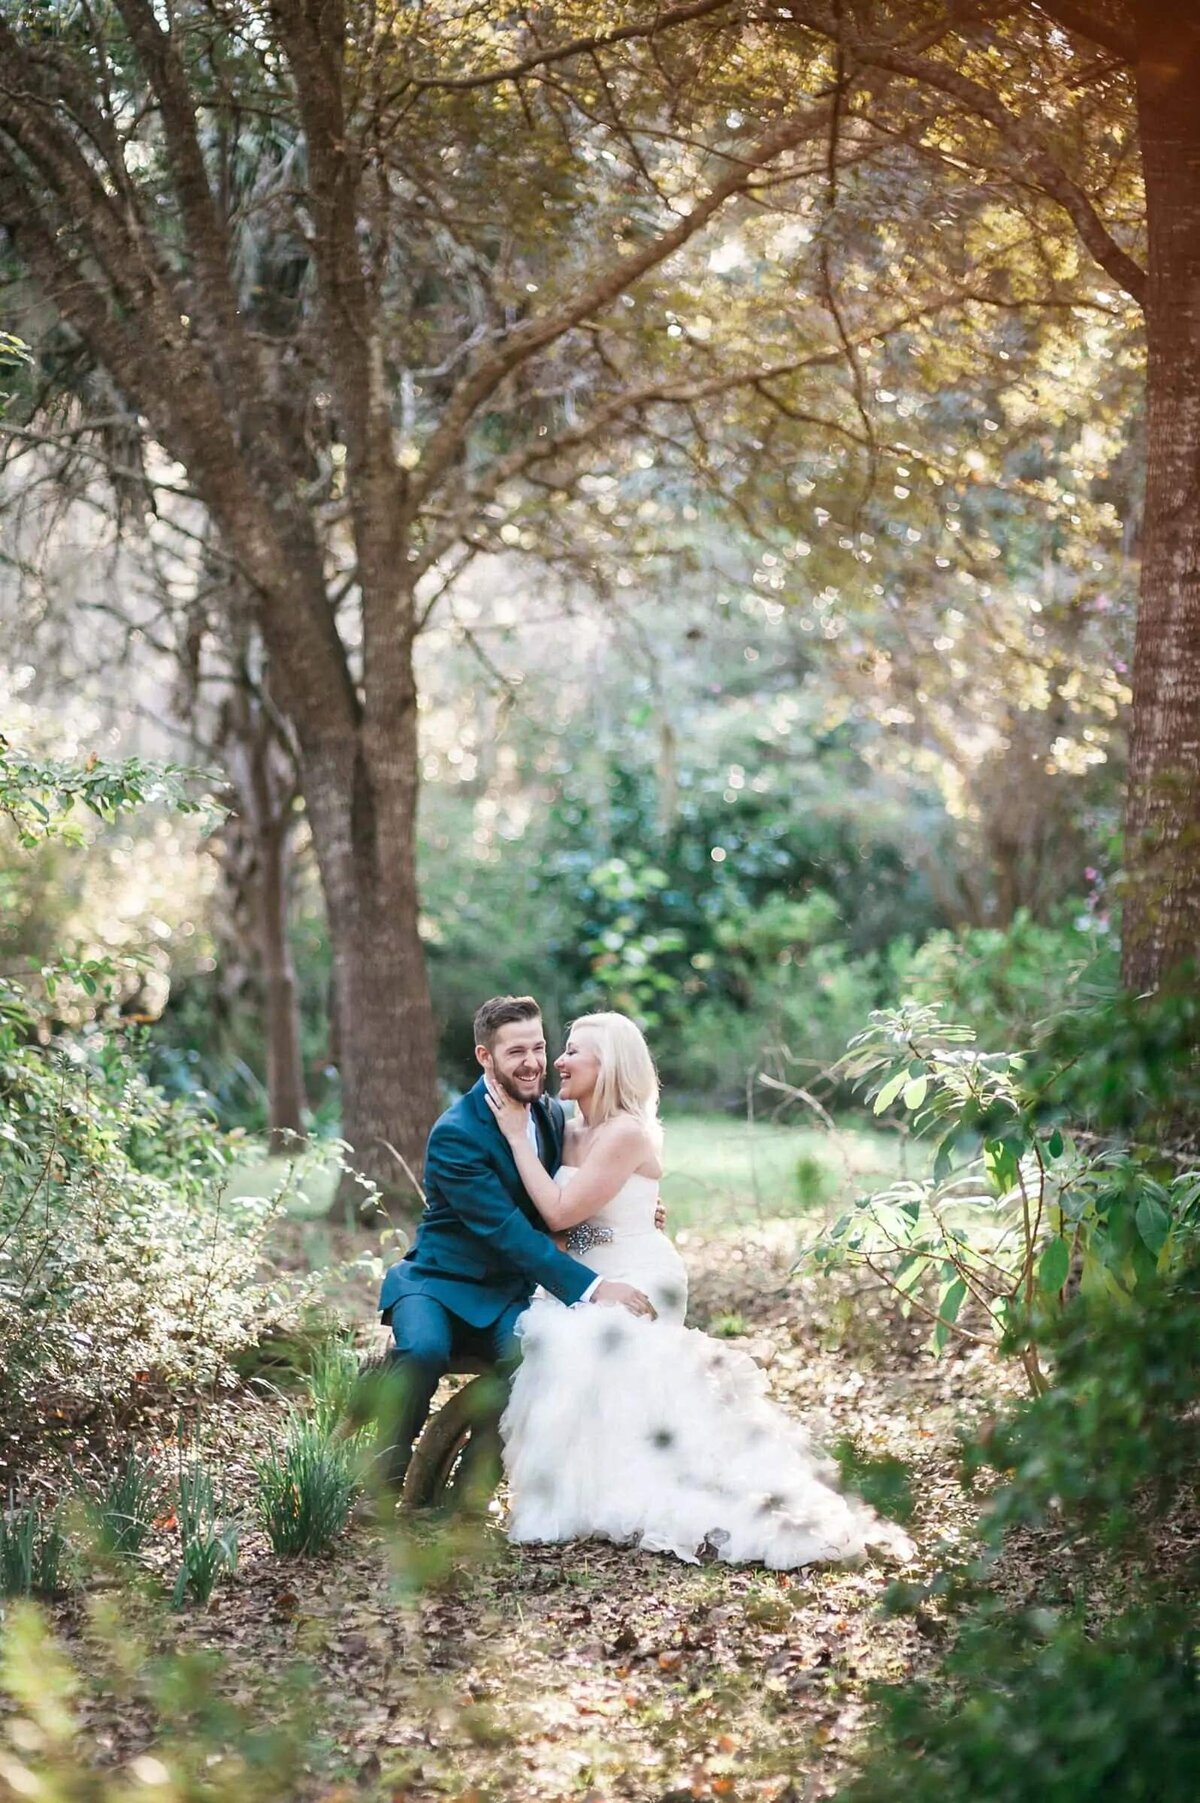 A bride and groom sitting on a bench in a wooded area.